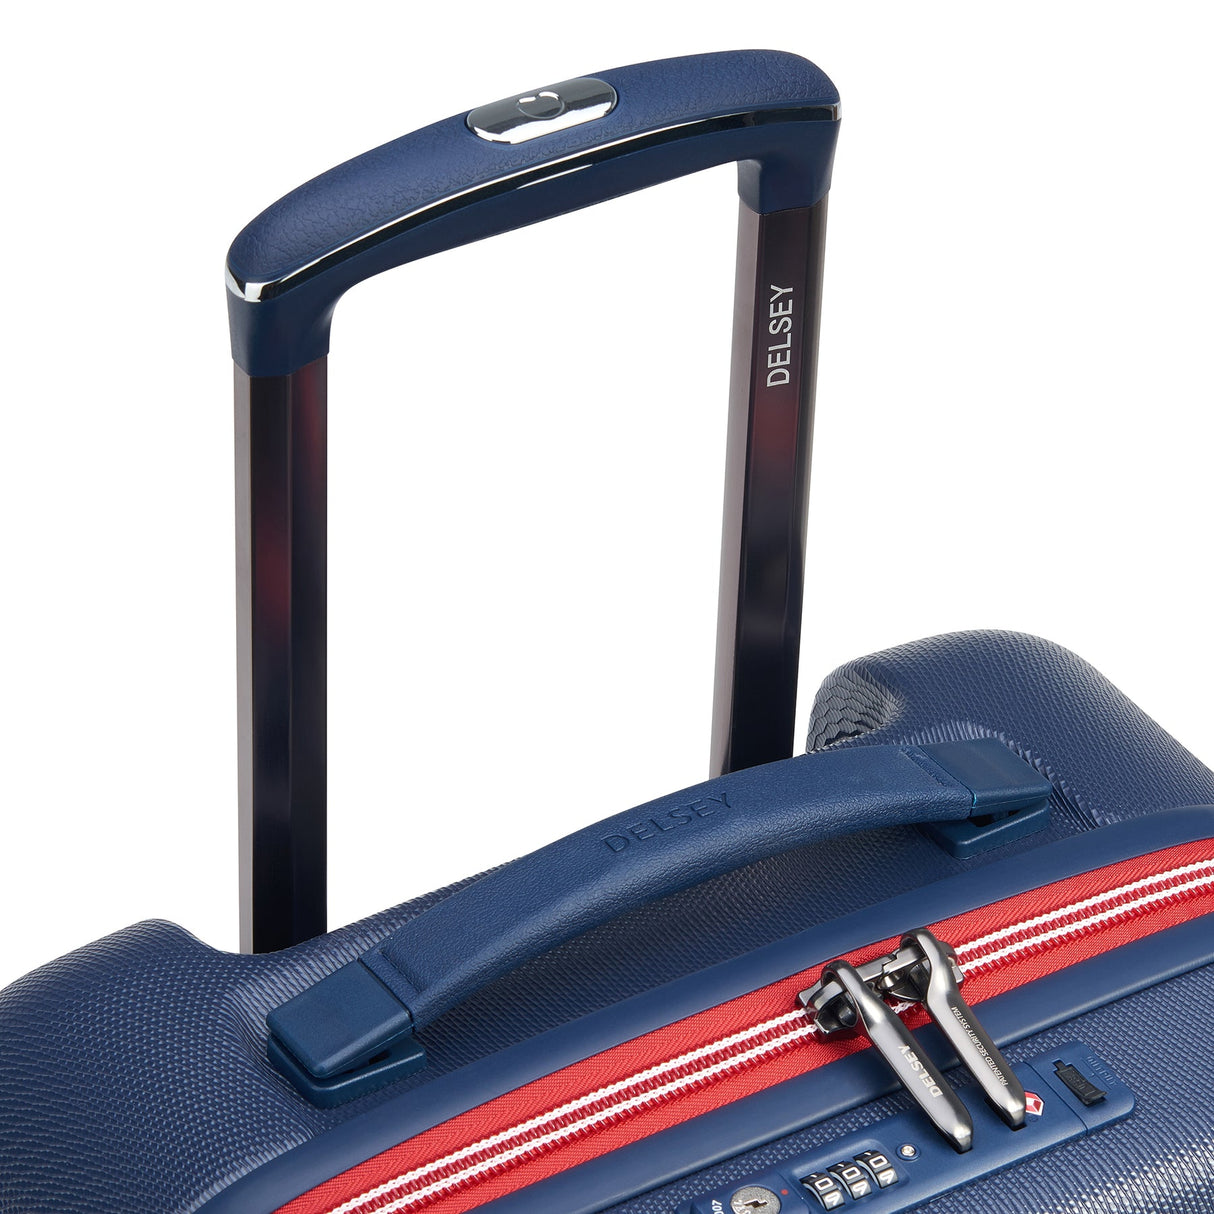 Delsey Chatelet Air 2.0 Carry-On Spinner , , delsey-chatelet-air-2.0-40167680502-09_1800x1800_c7a1a224-9dde-4182-afca-9286f7739bbb